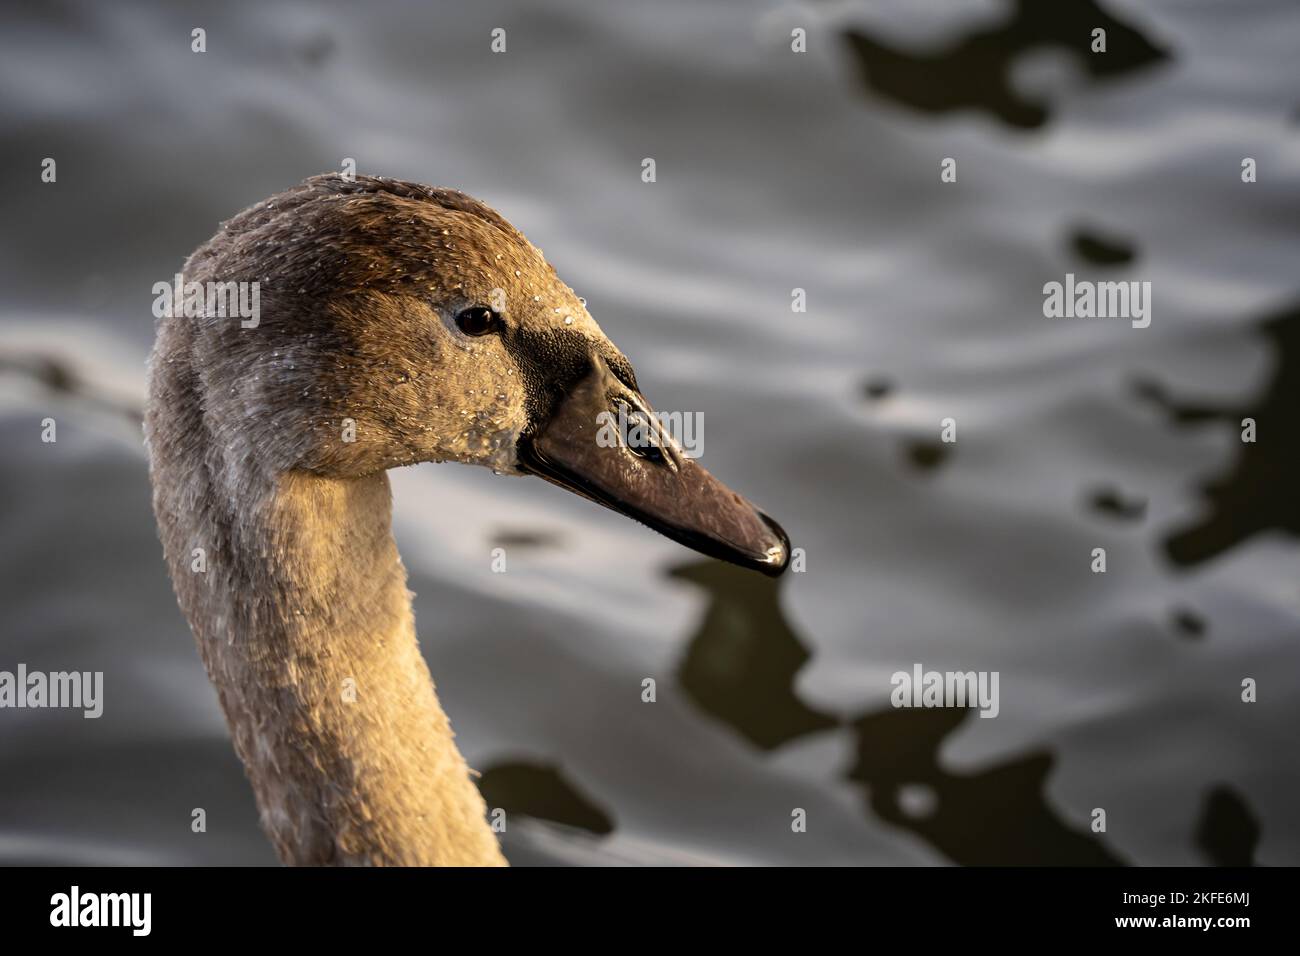 Young swan portrait close-up, head and neck of a brown cygnet with drops of water. Stock Photo